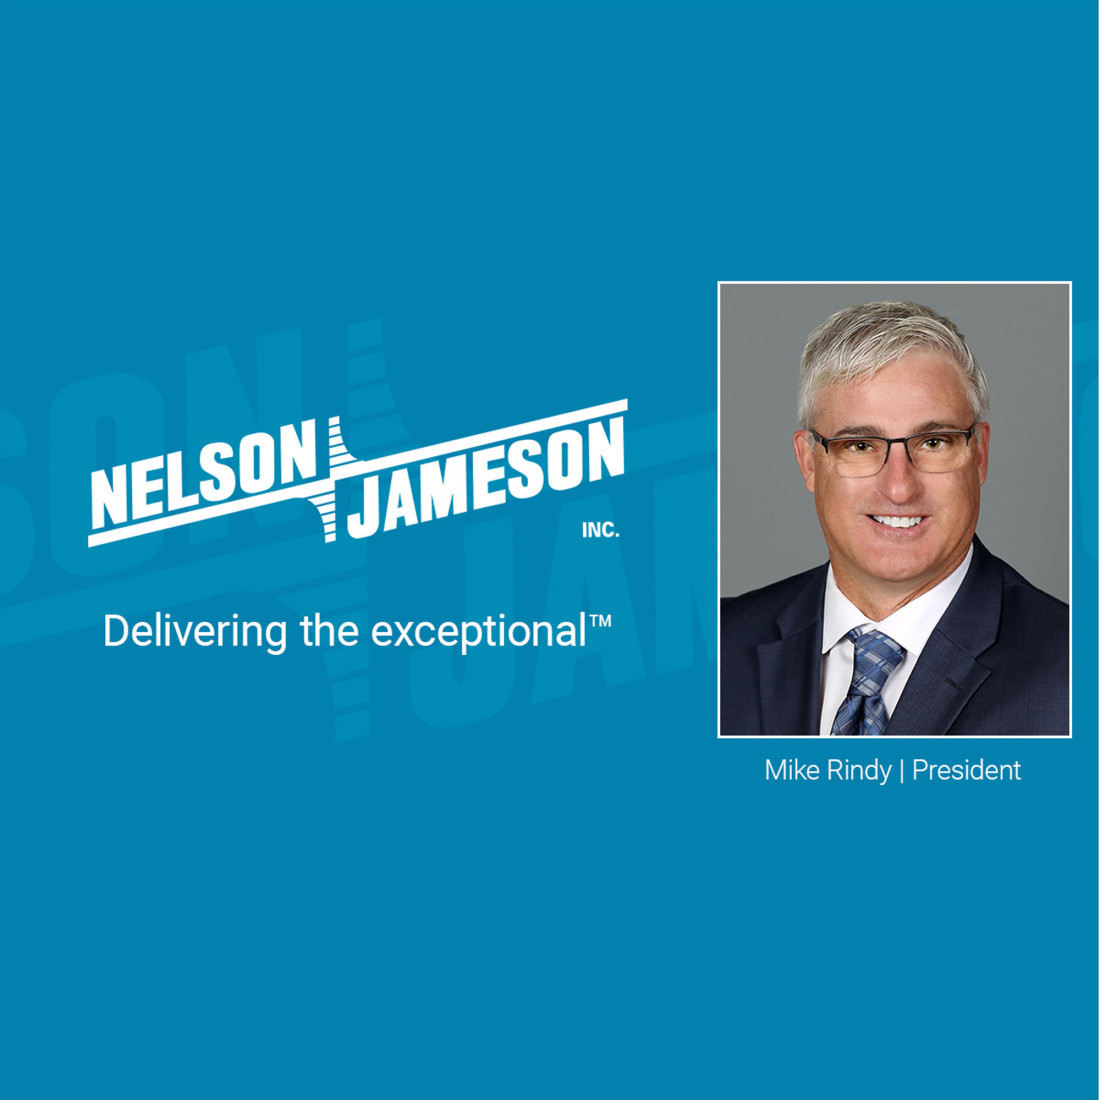 Nelson-Jameson President Mike Rindy named a CEO to Watch by “Family Business Magazine”